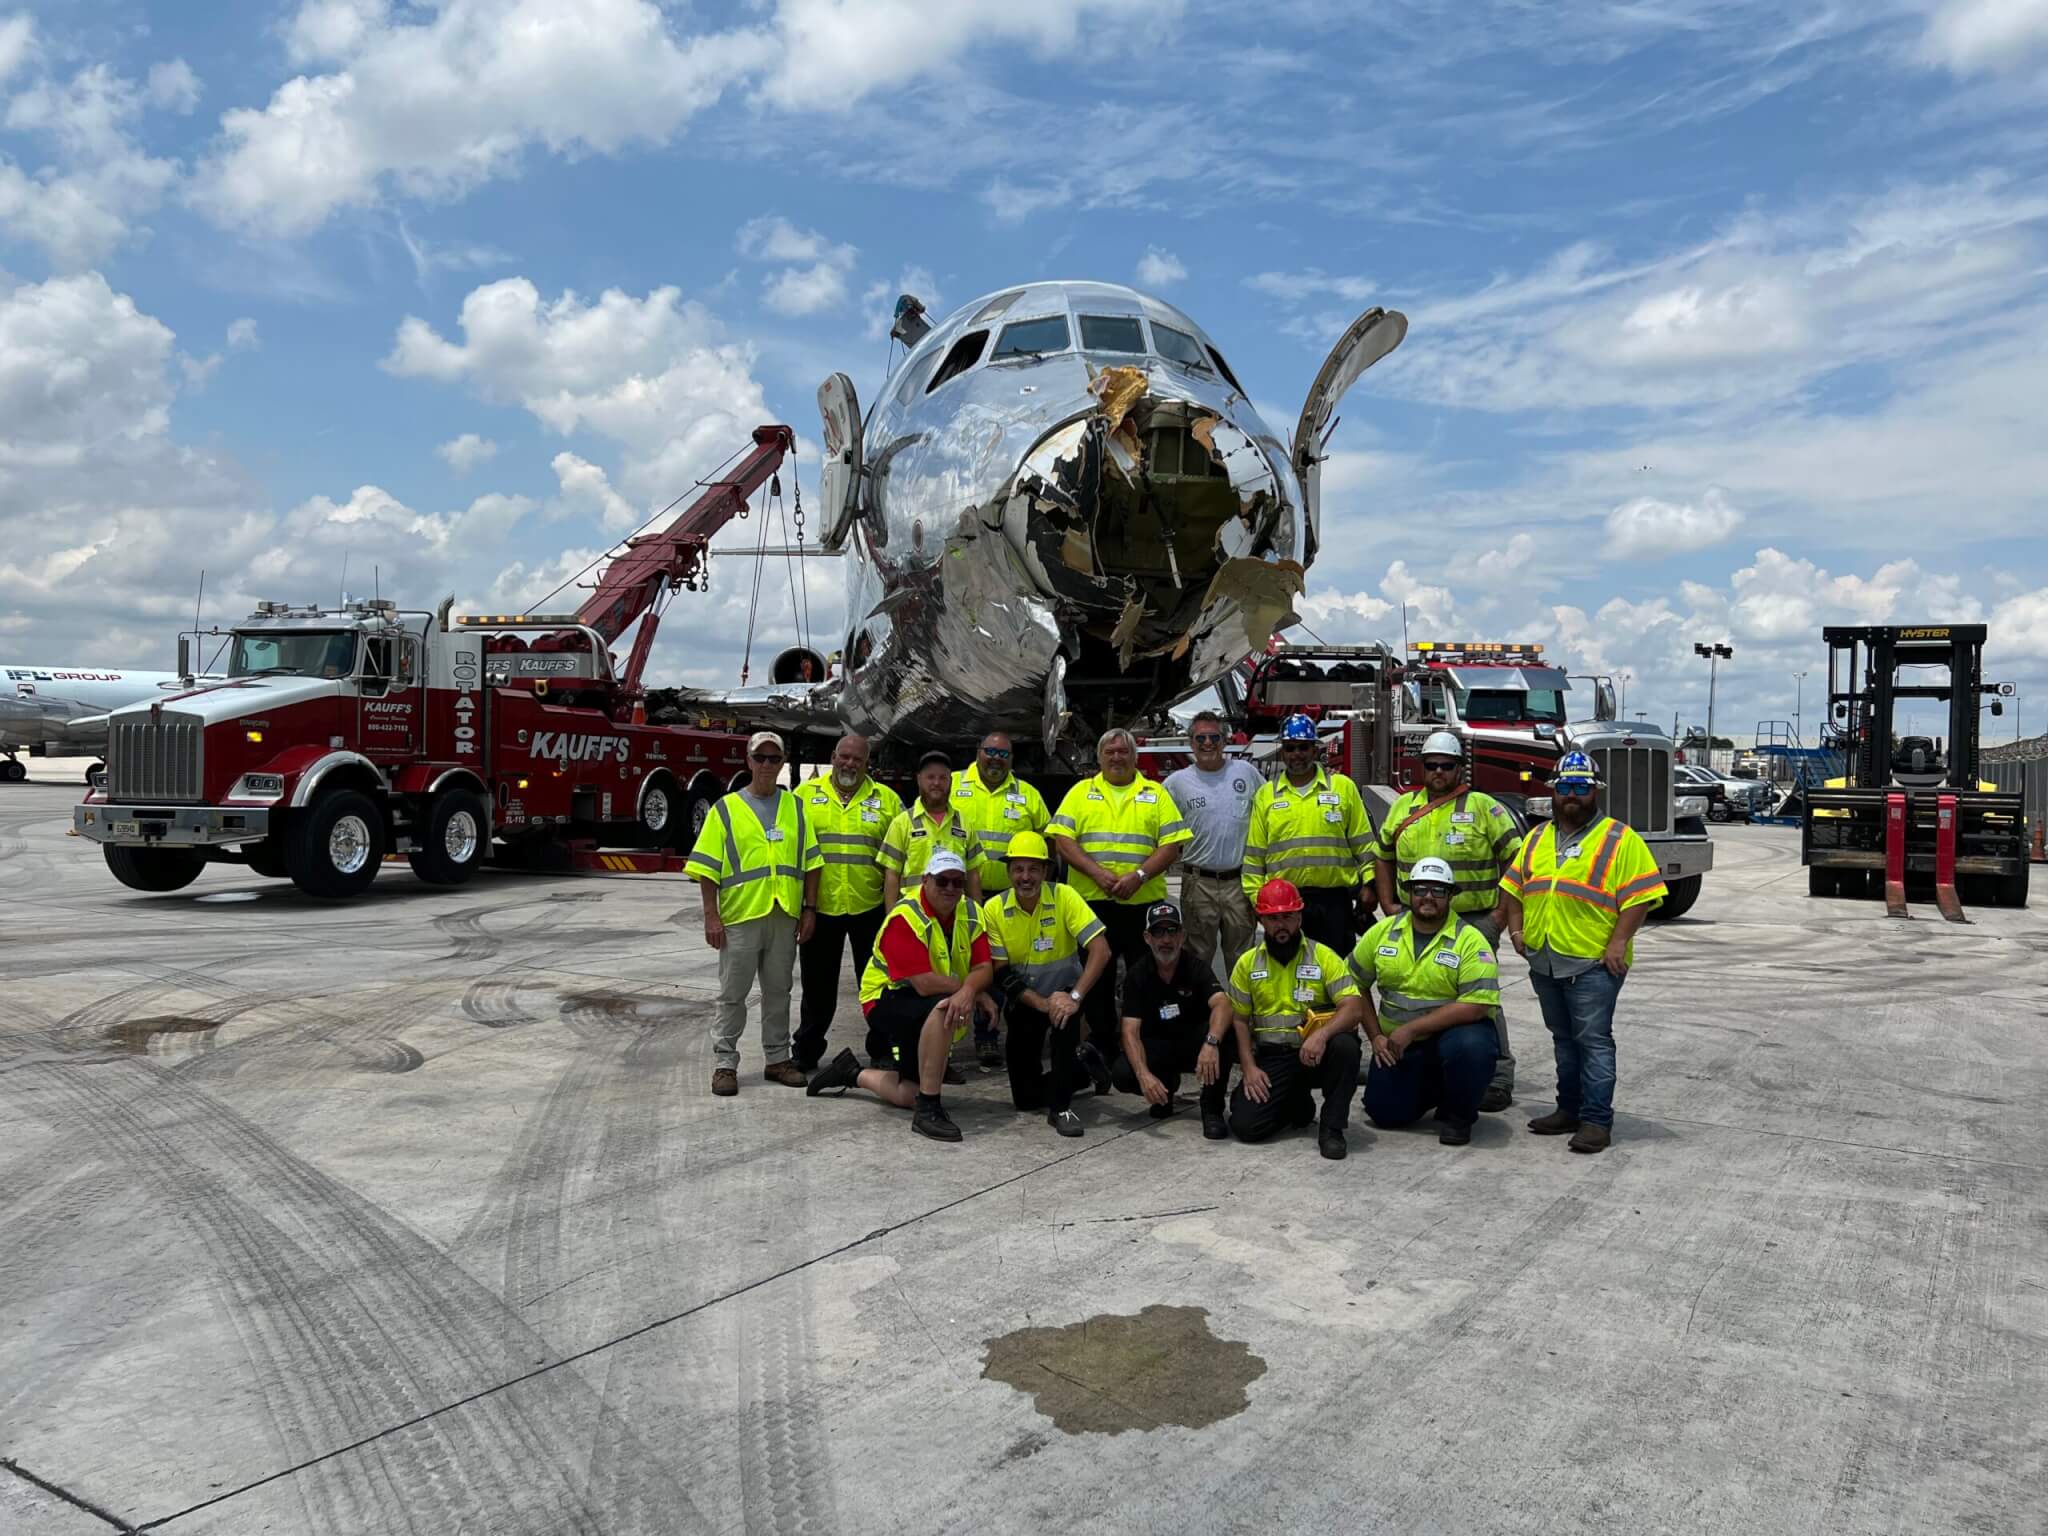 Guardian Fleet Services Aircraft Recovery at MIA on June 21, 2022